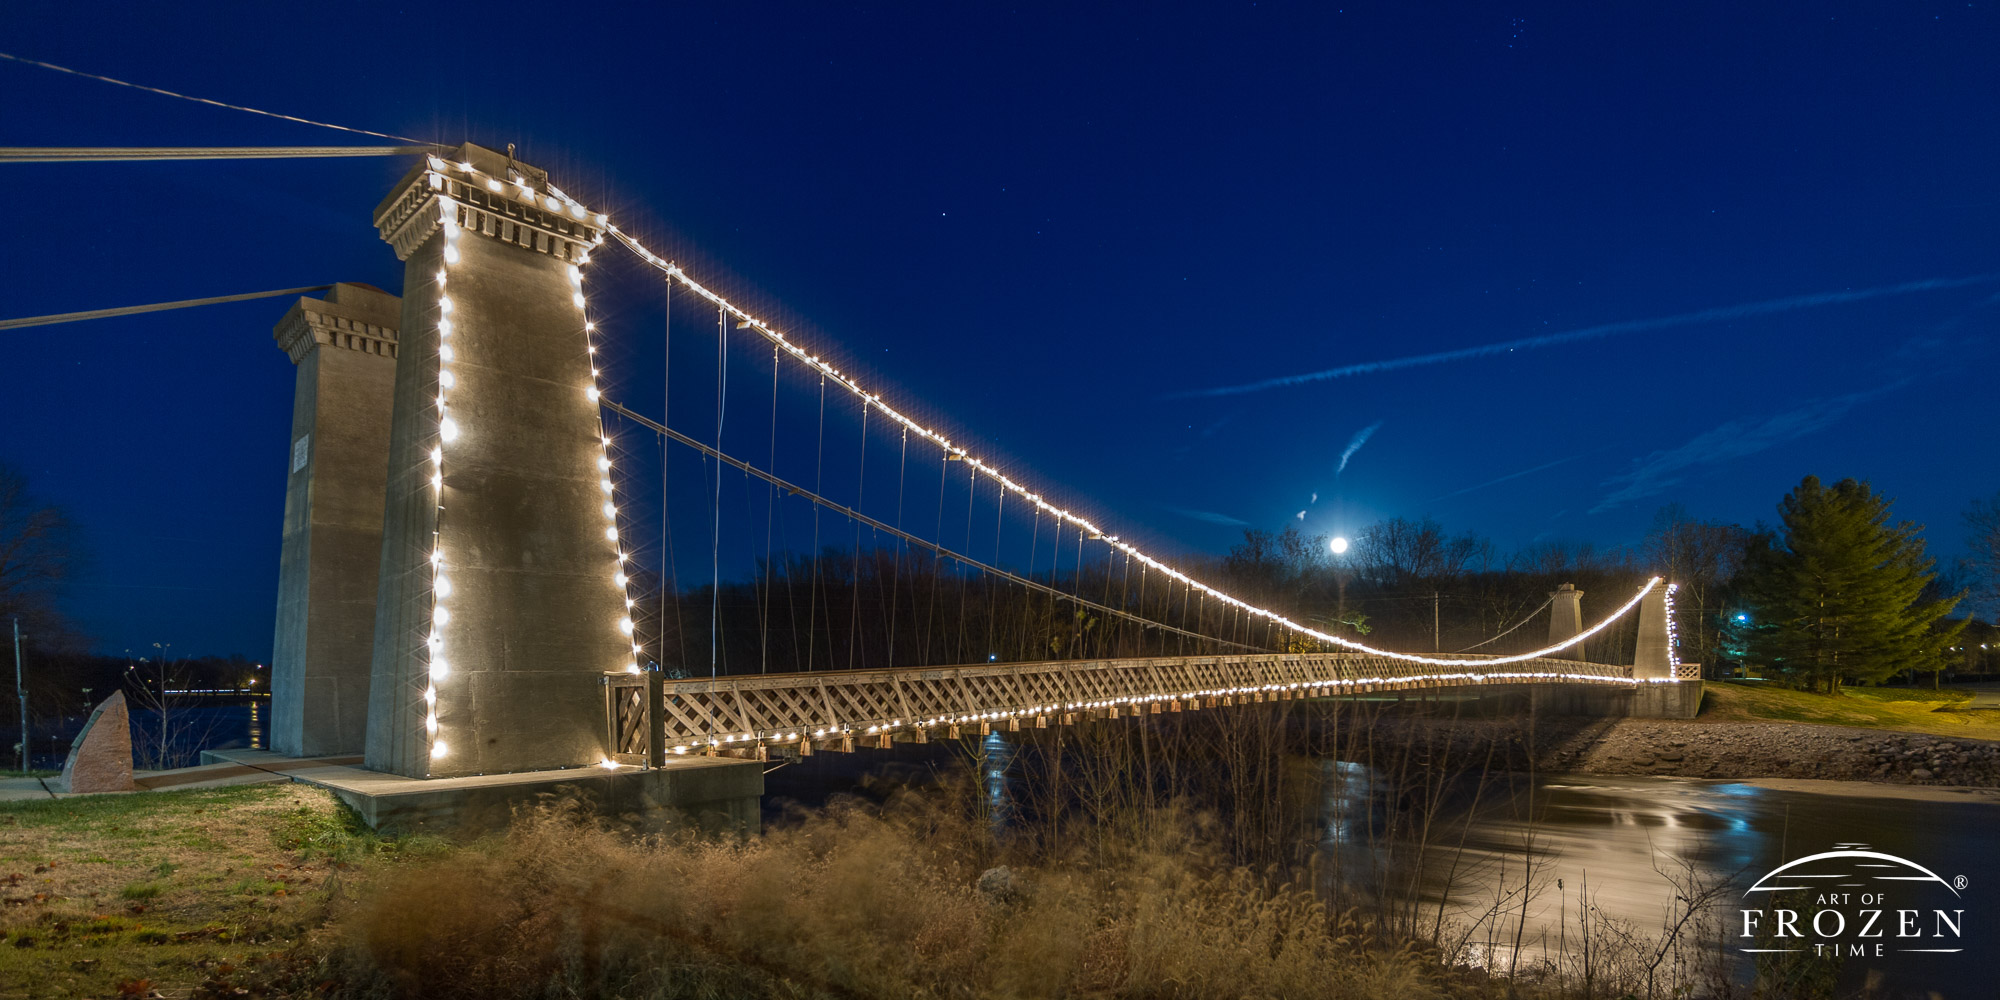 General Dean Bridge outlined in Christmas Lights as the Kaskaskia River flows underneath and moon rises in the blue night sky.